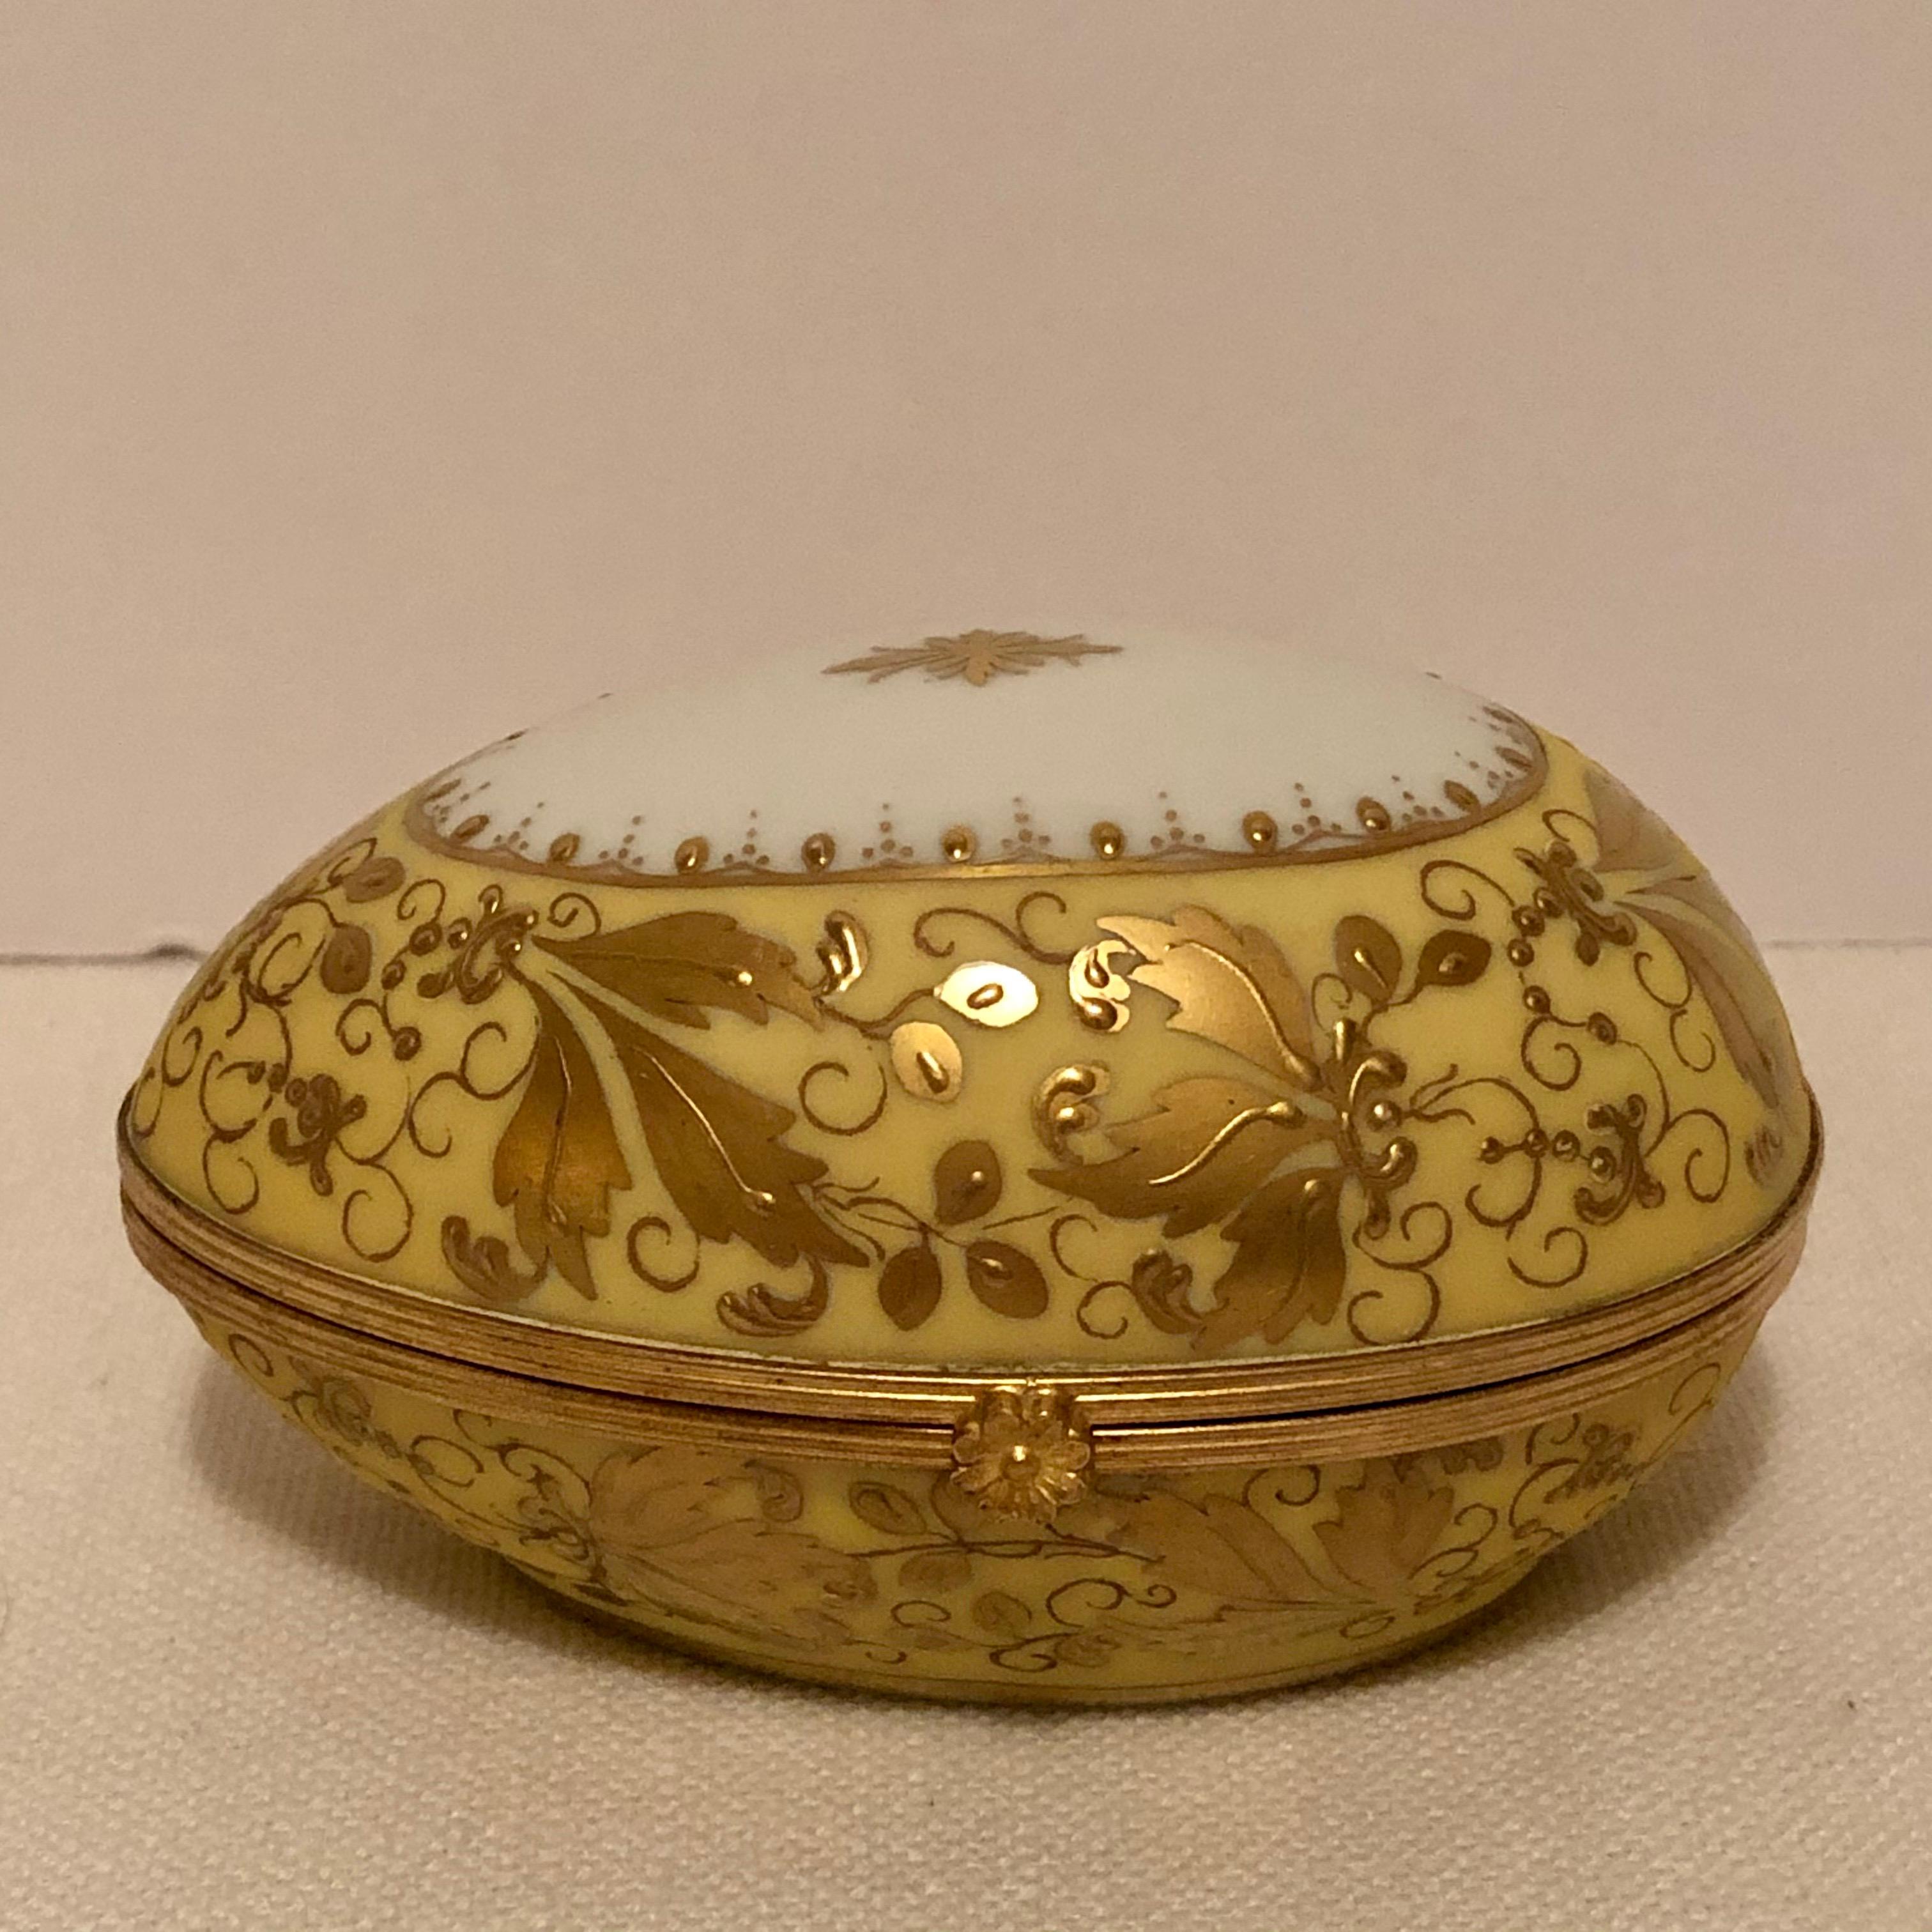 Gilt Le Tallec Porcelain Egg Shaped Box Decorated with Exquisite Raised Gilding